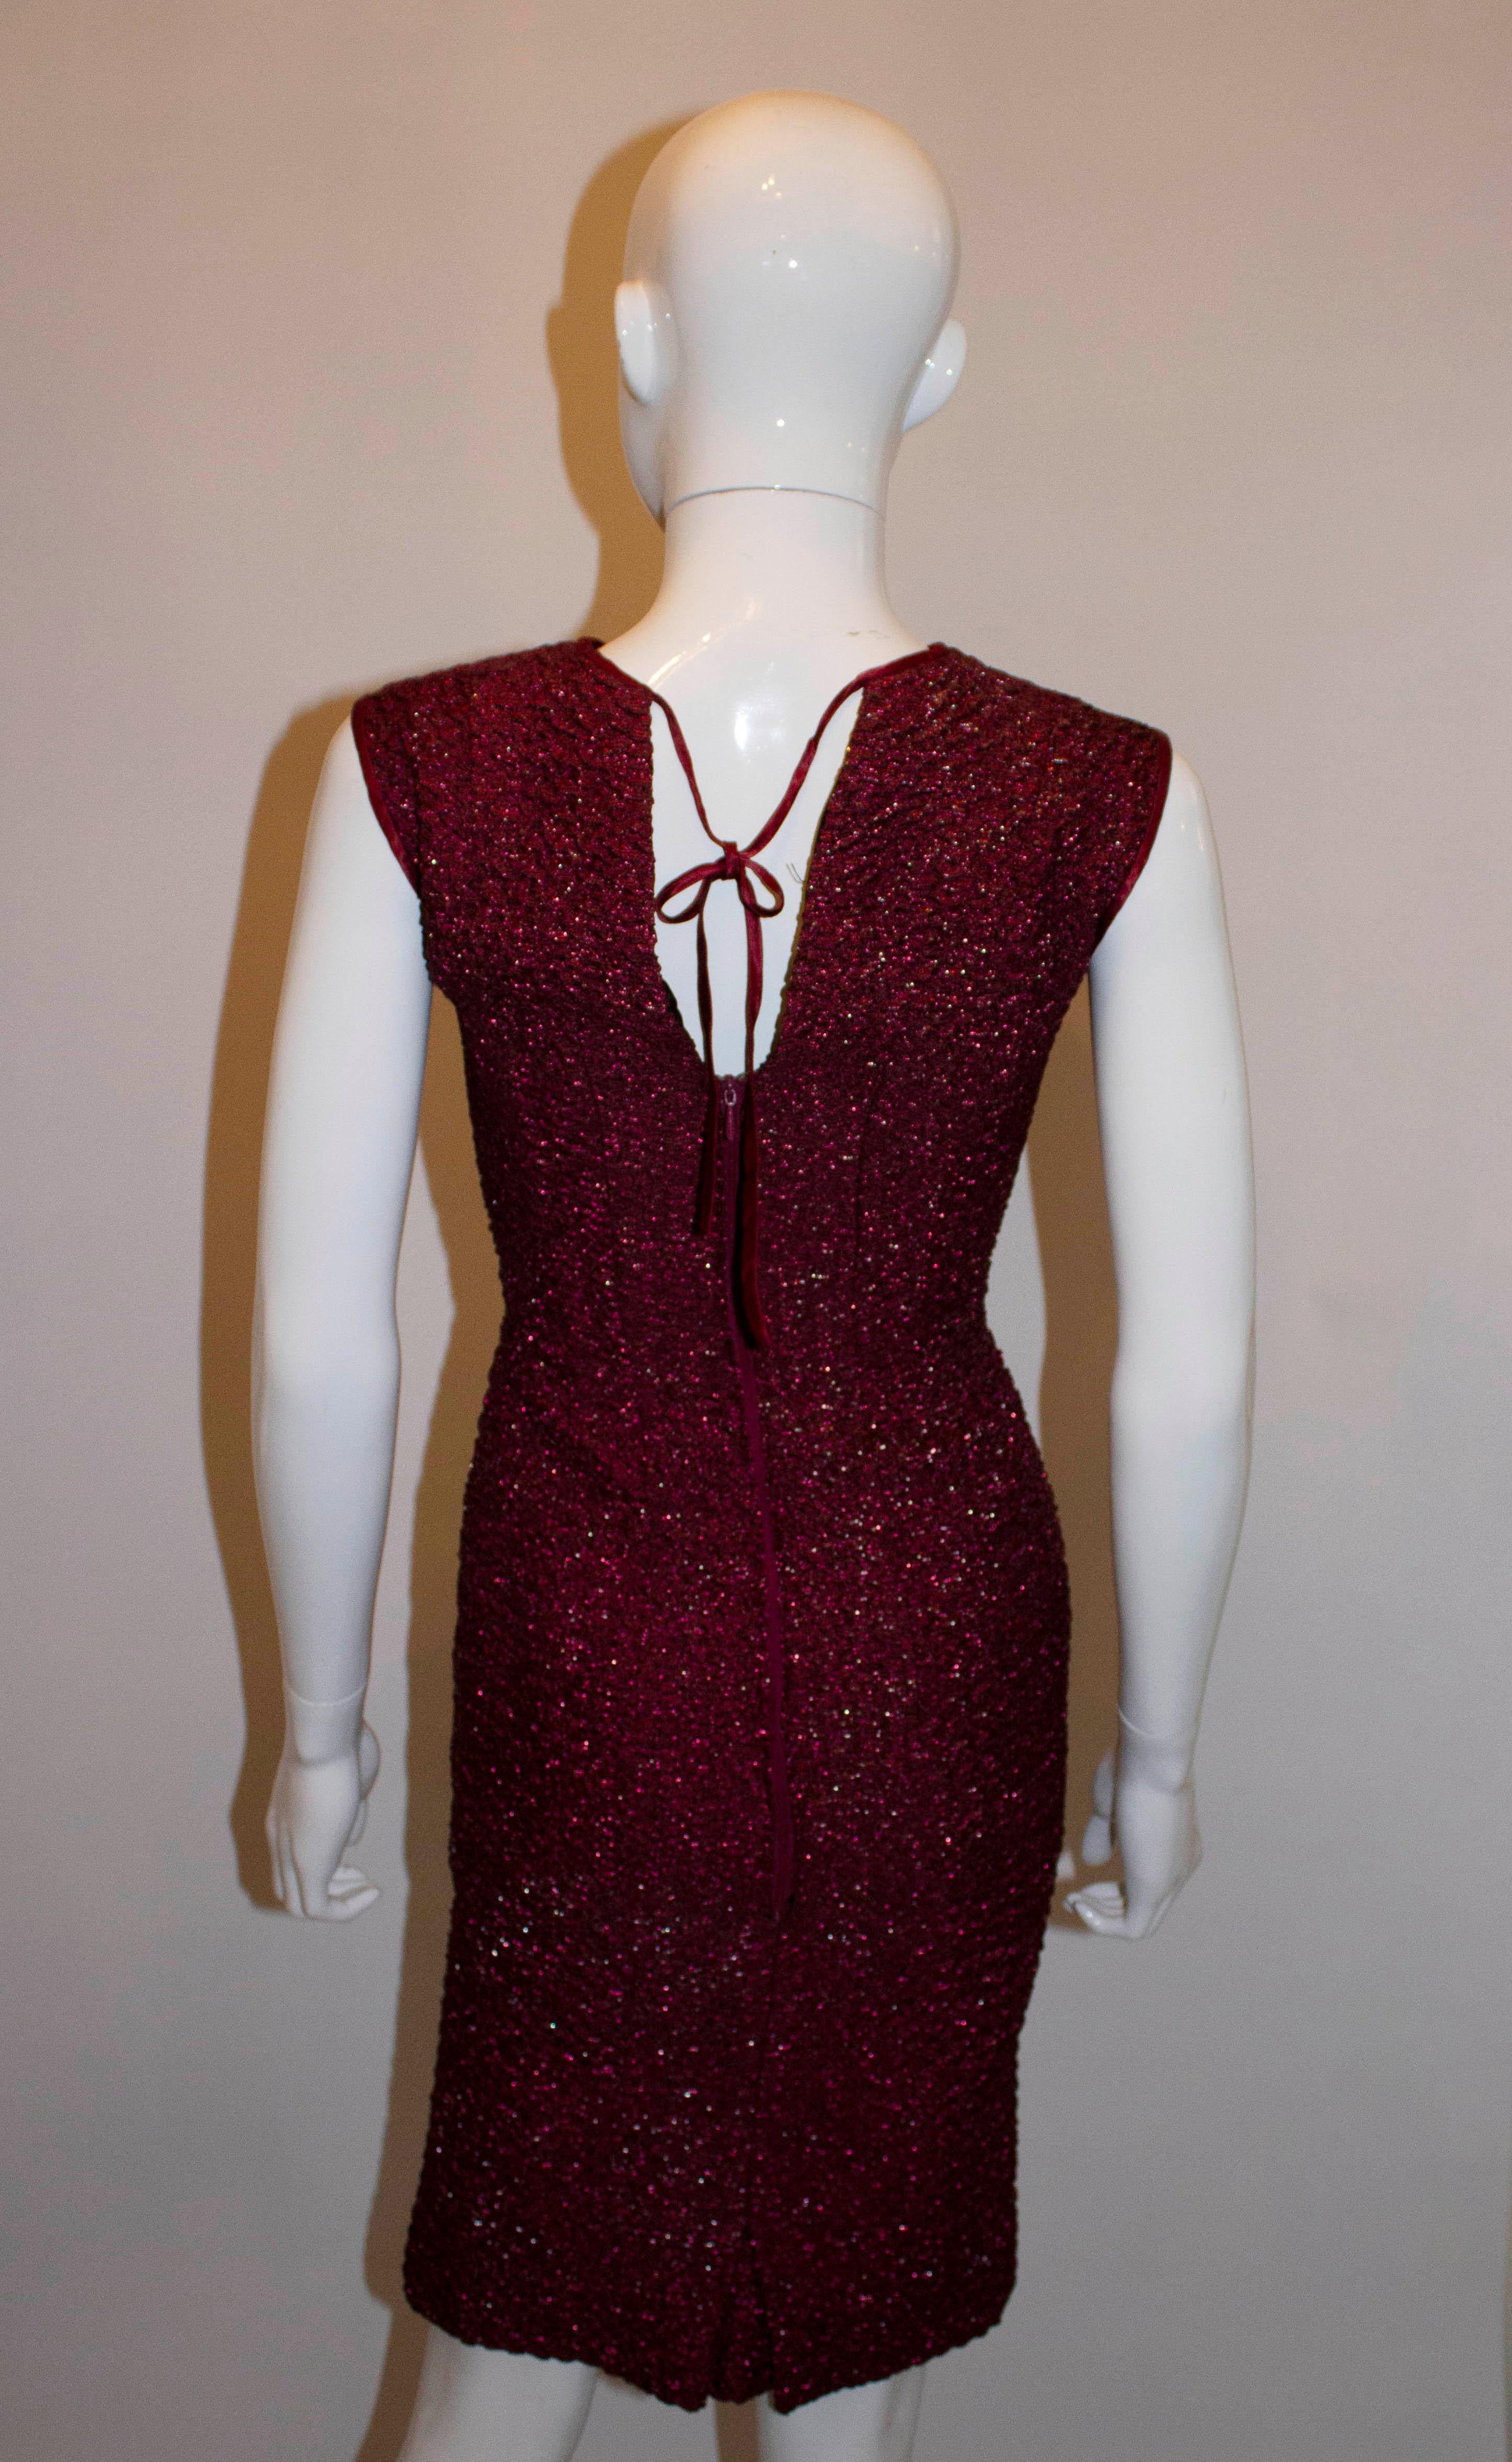 A chic vintage cocktail dress by Pichat  Chaleard (  Paris and Lyon) . The dress is a pretty raspberry colour with sparkle effect. It is fully lined, with a v back line and ribbon tie at the neck.
Measurements: Bust 35'', waist 25'',length 39''